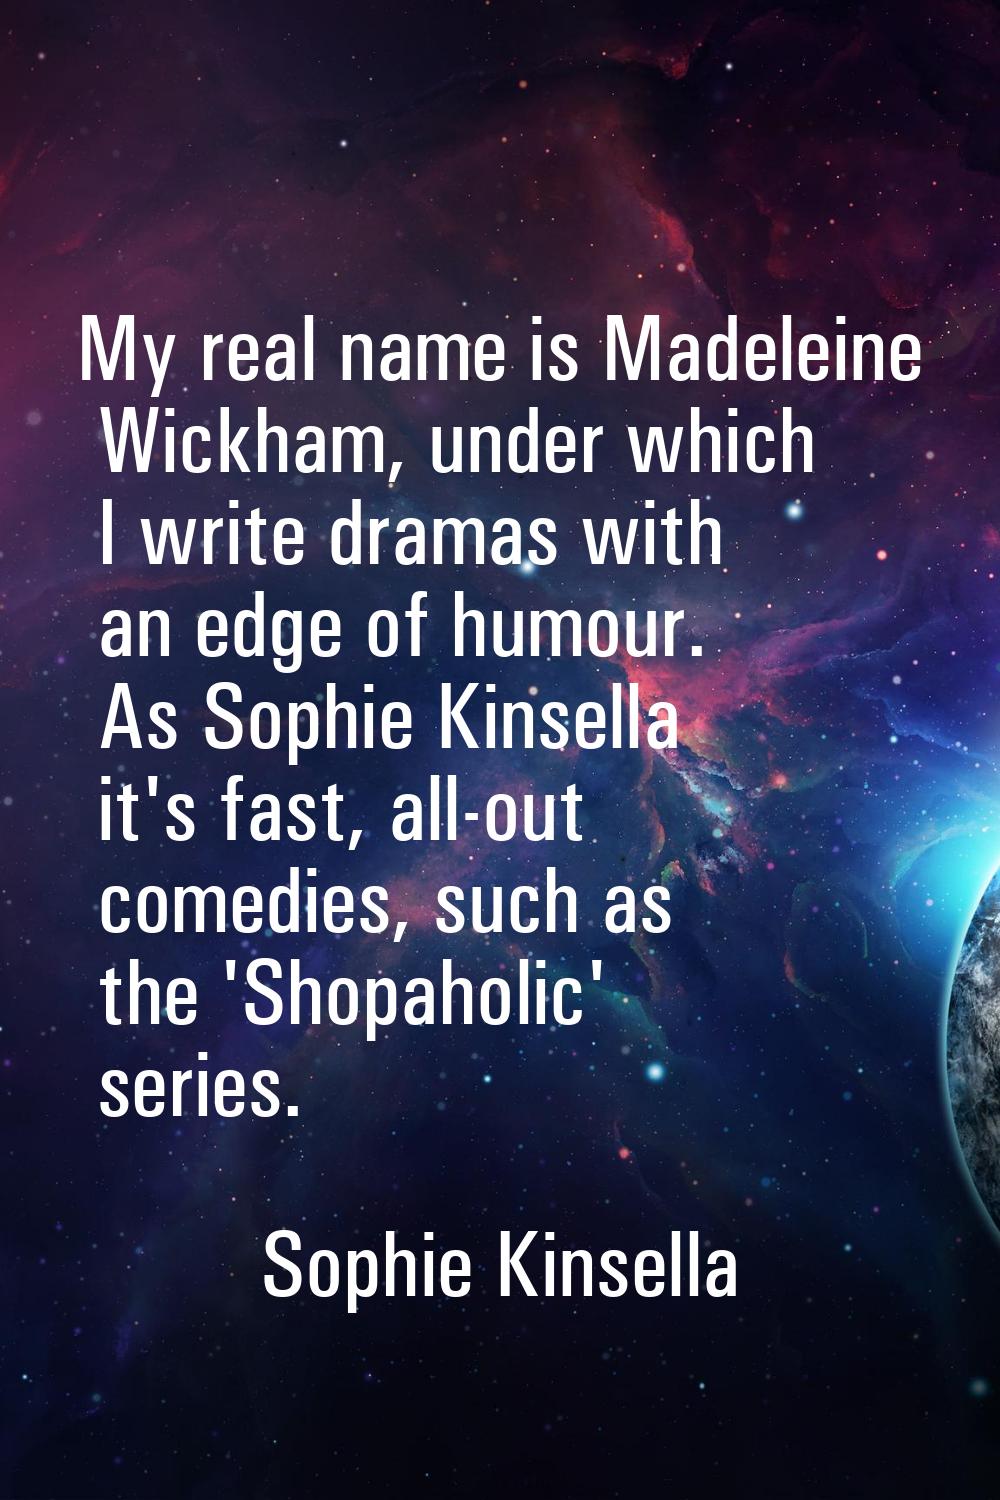 My real name is Madeleine Wickham, under which I write dramas with an edge of humour. As Sophie Kin